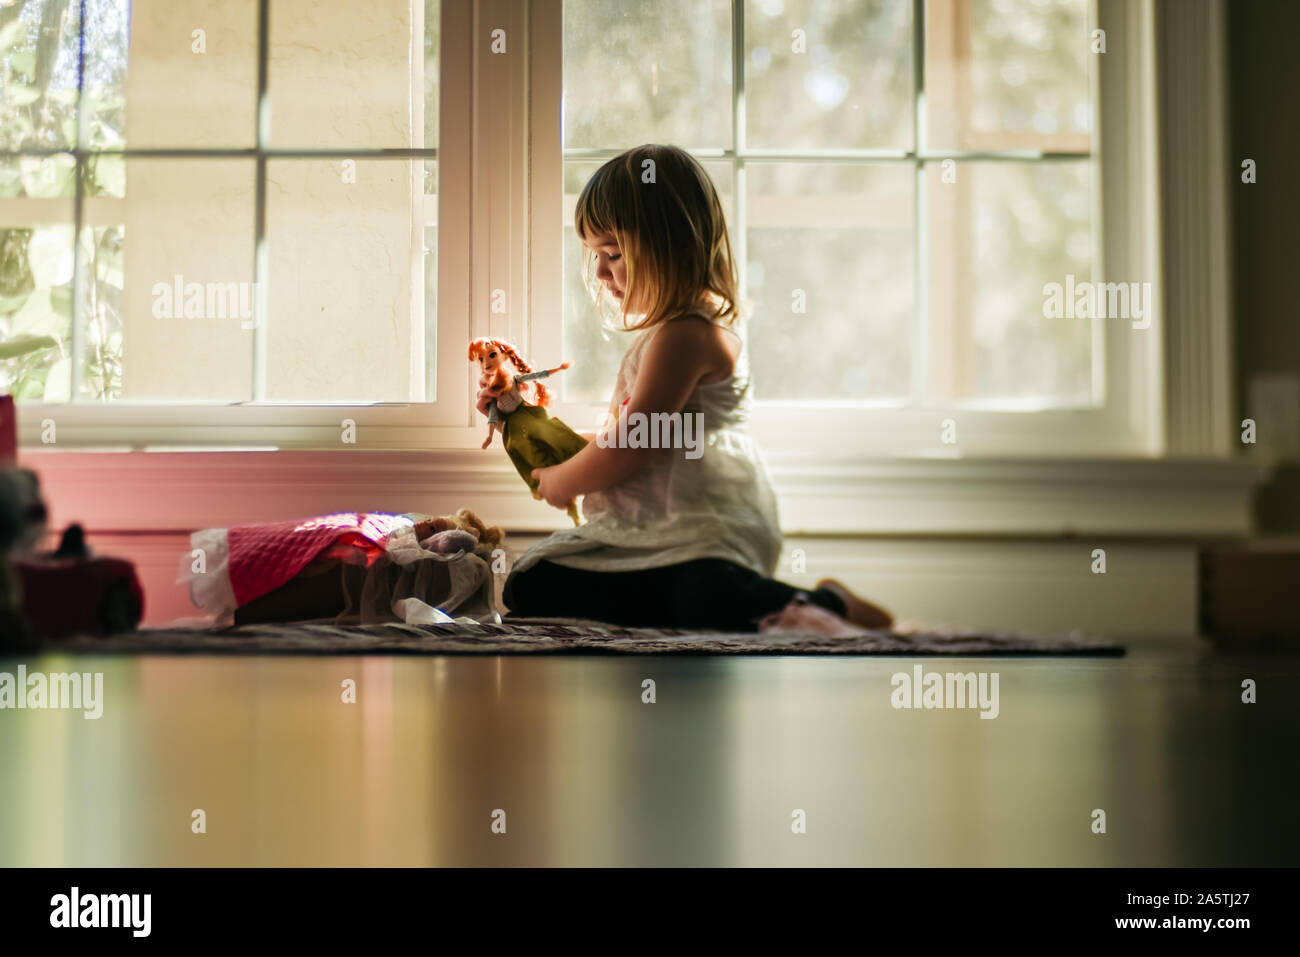 Young Girl playing dolls by window Banque D'Images